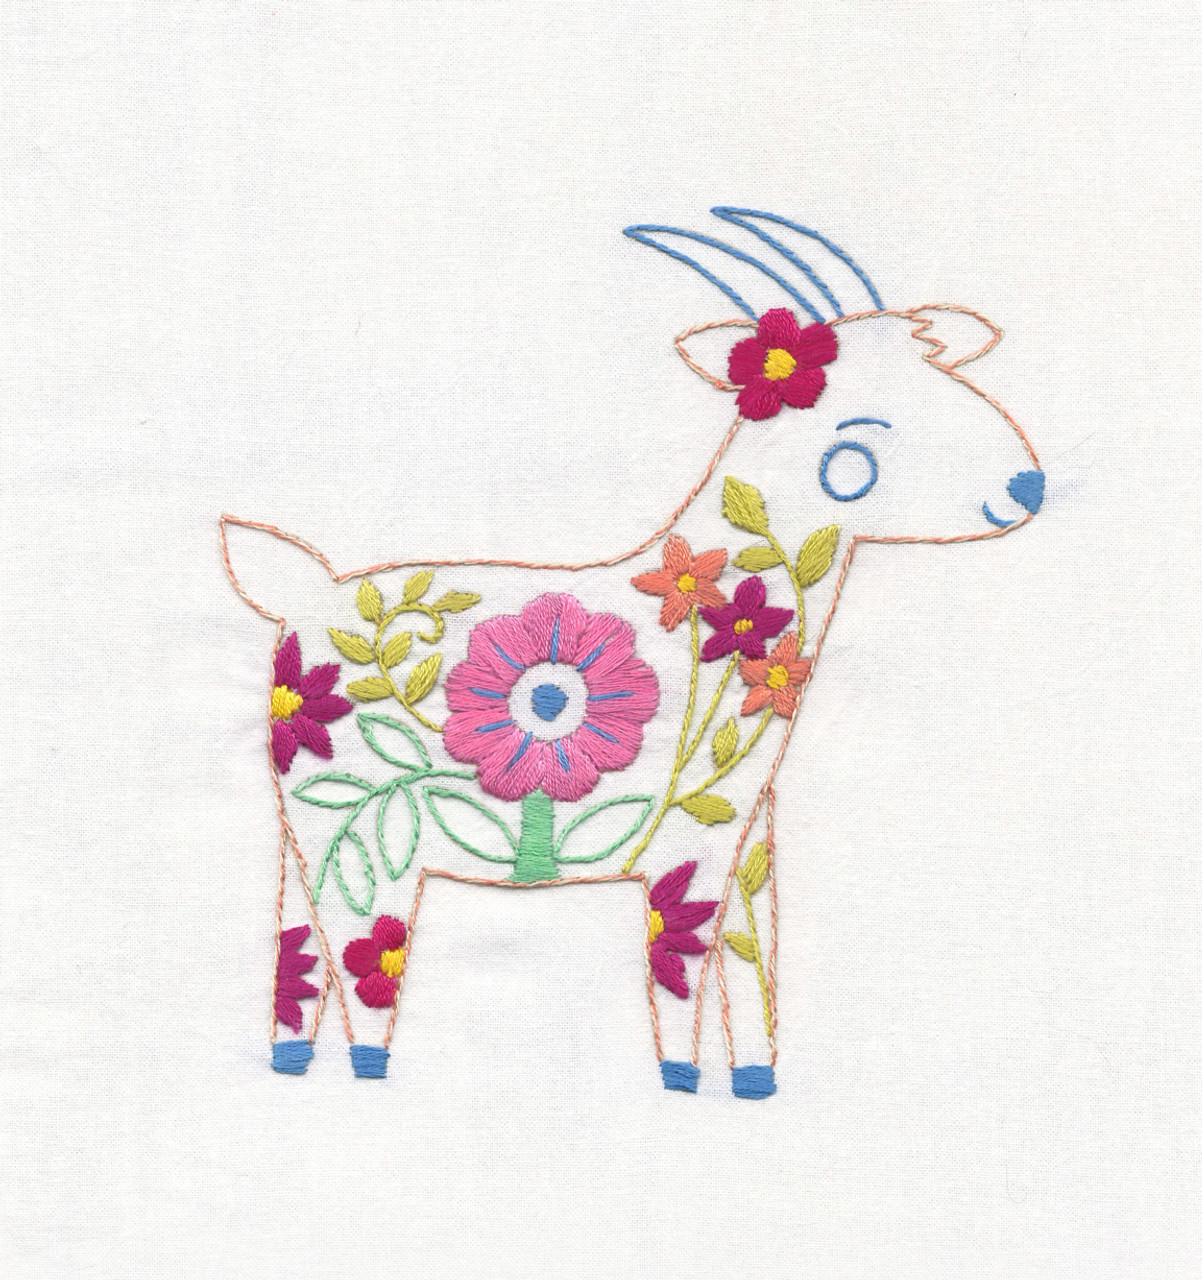 BARN EMBROIDERY- Barns, Farm Life, Farm Embroidery, Flowers - Instant  Downloadable Machine Embroidery - Light Fill Stitch